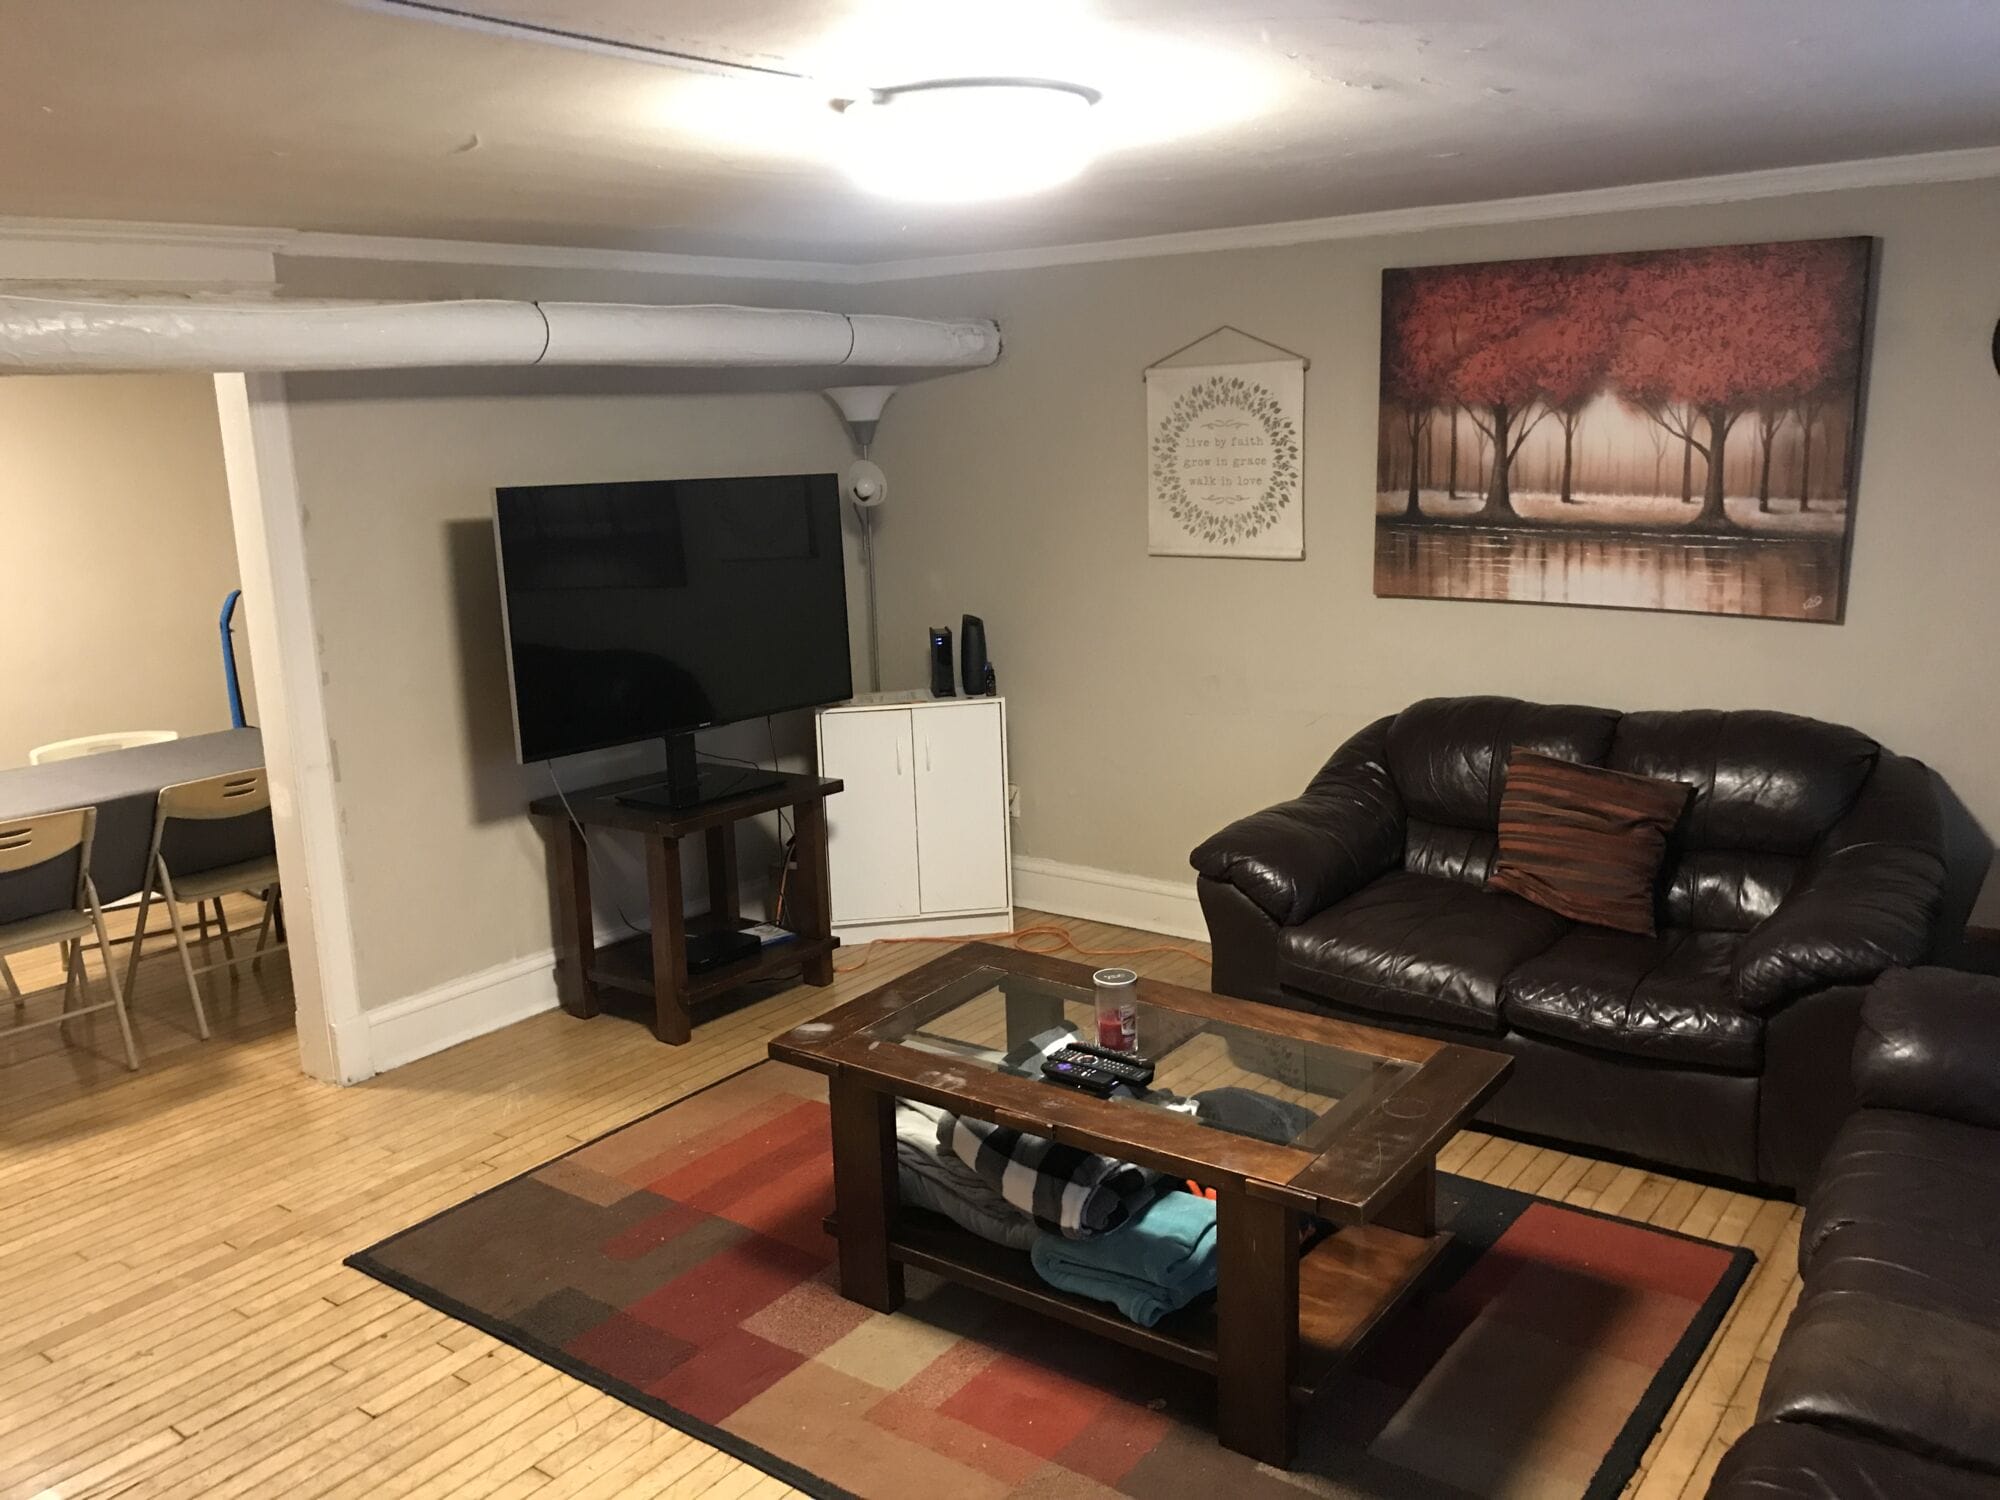 2594 N. Stowell Ave. Apt at The Stanley – Zolper Property Management